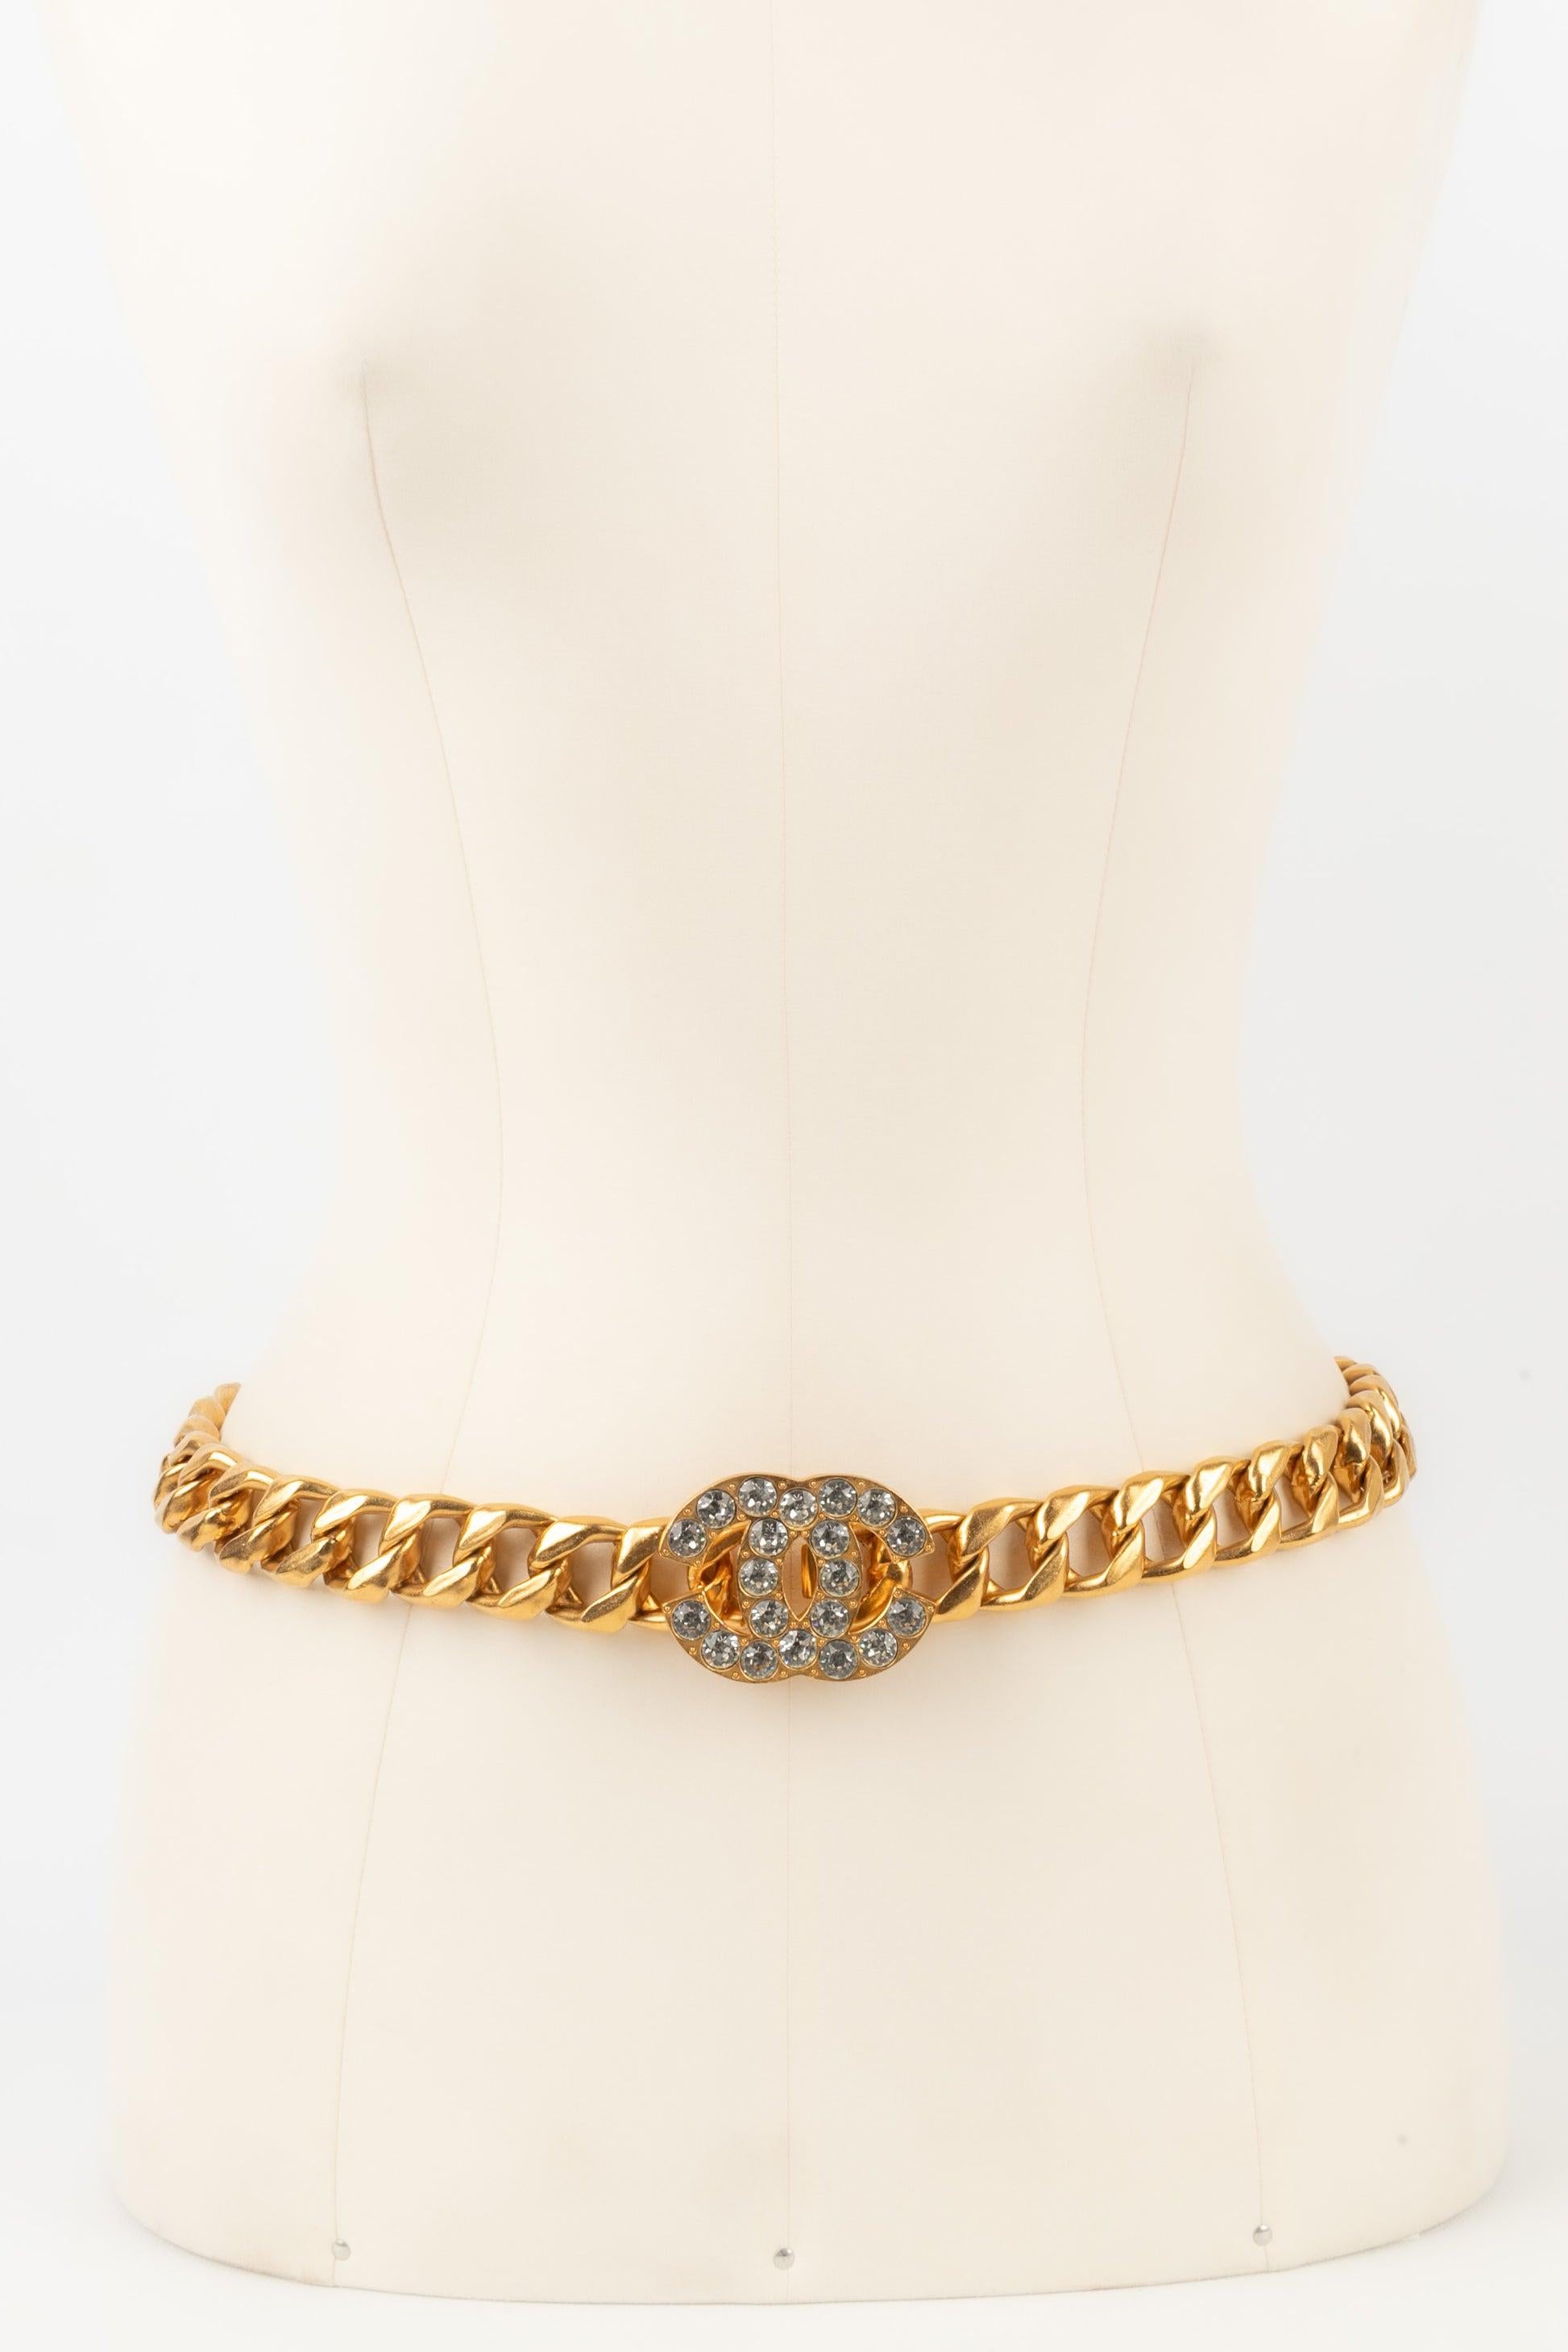 Chanel Golden Metal Chain Belt with CC Logo Buckle, 1995 For Sale 3